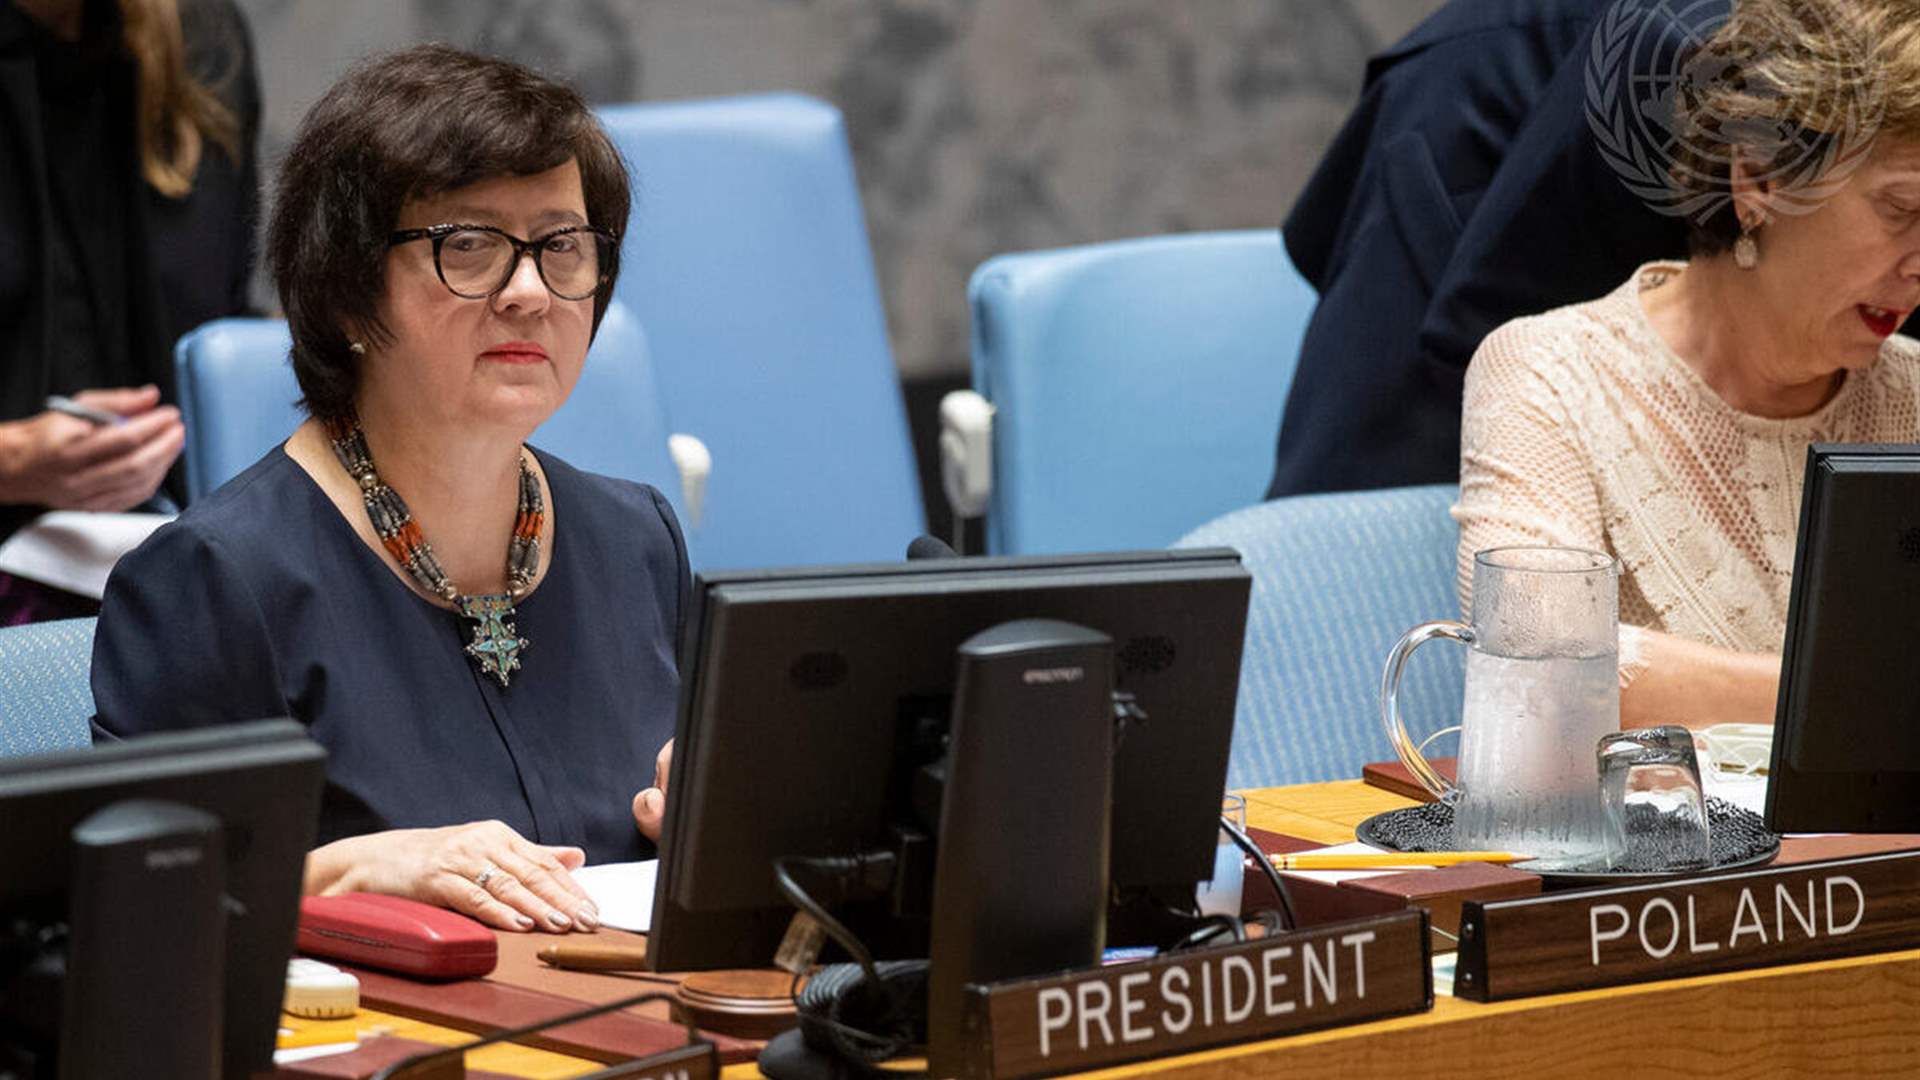 Risk of broader conflict: UN Coordinator urges immediate halt and adherence to Resolution 1701